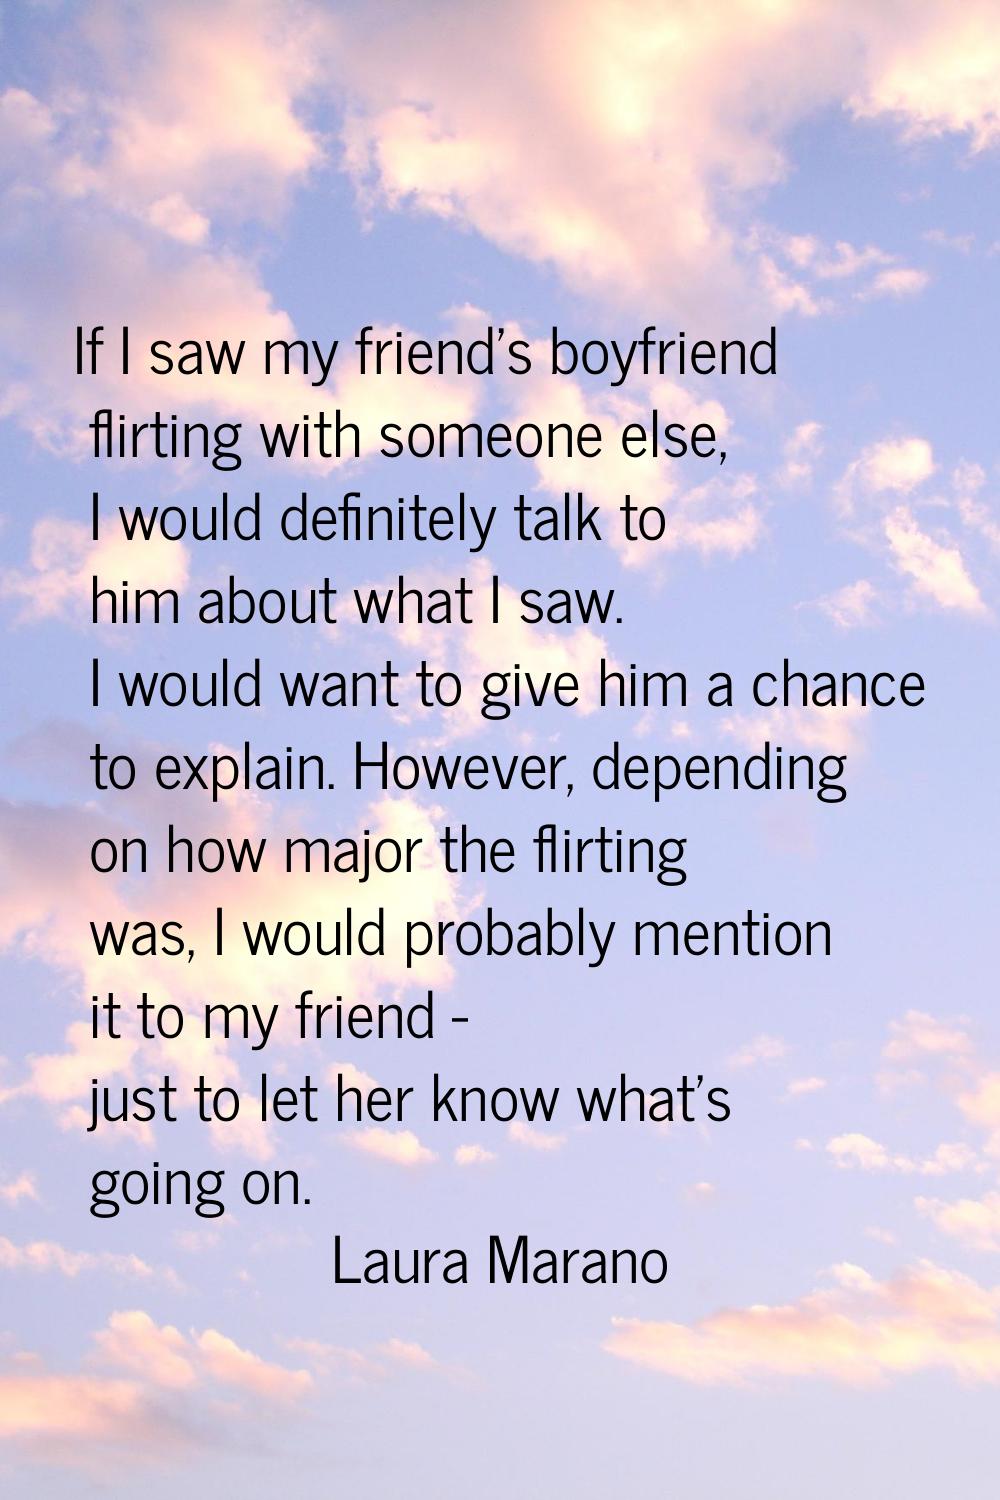 If I saw my friend's boyfriend flirting with someone else, I would definitely talk to him about wha